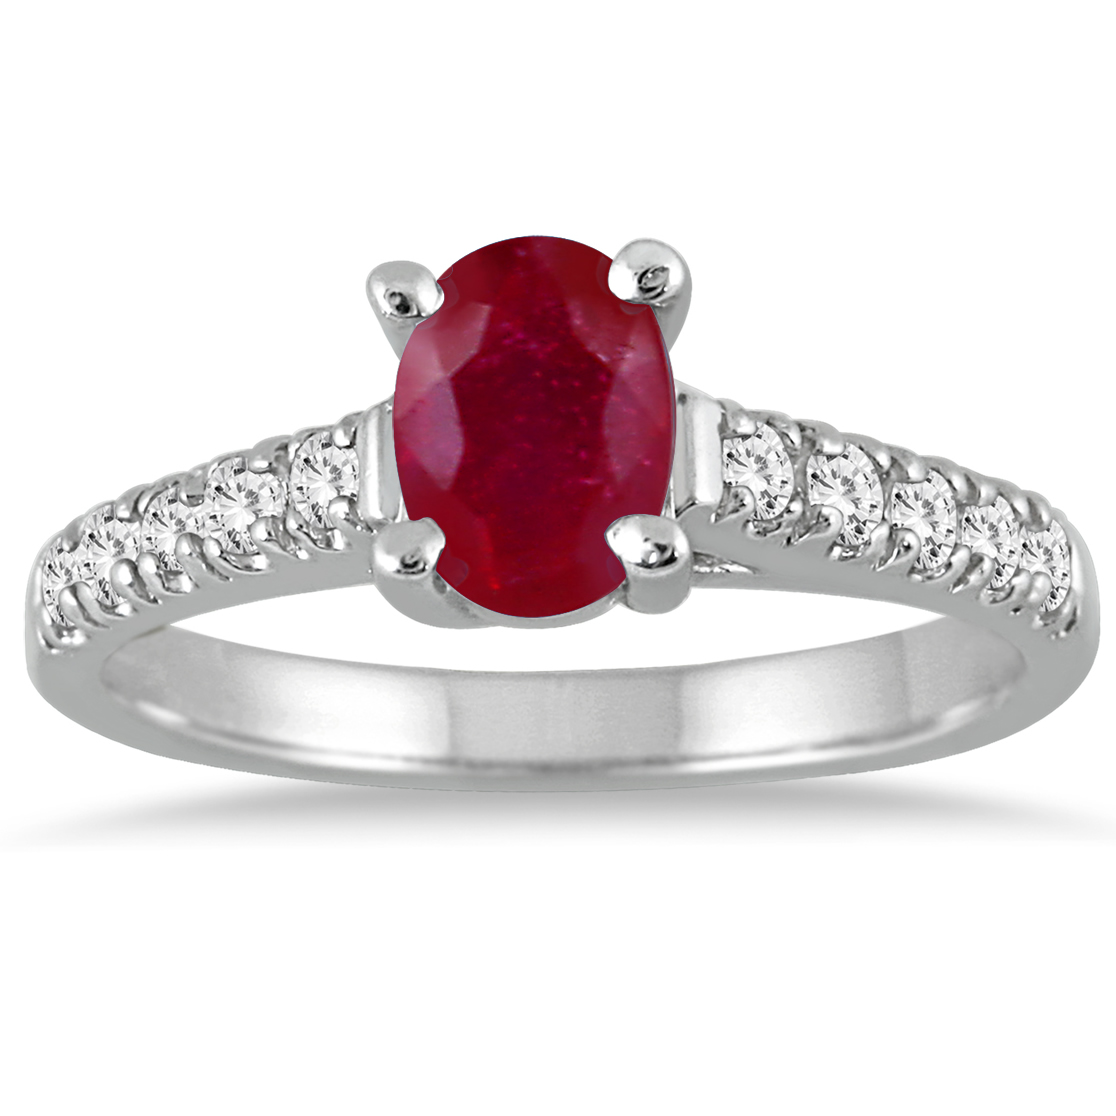 1 Carat Oval Ruby and Diamond Ring in 14K White Gold